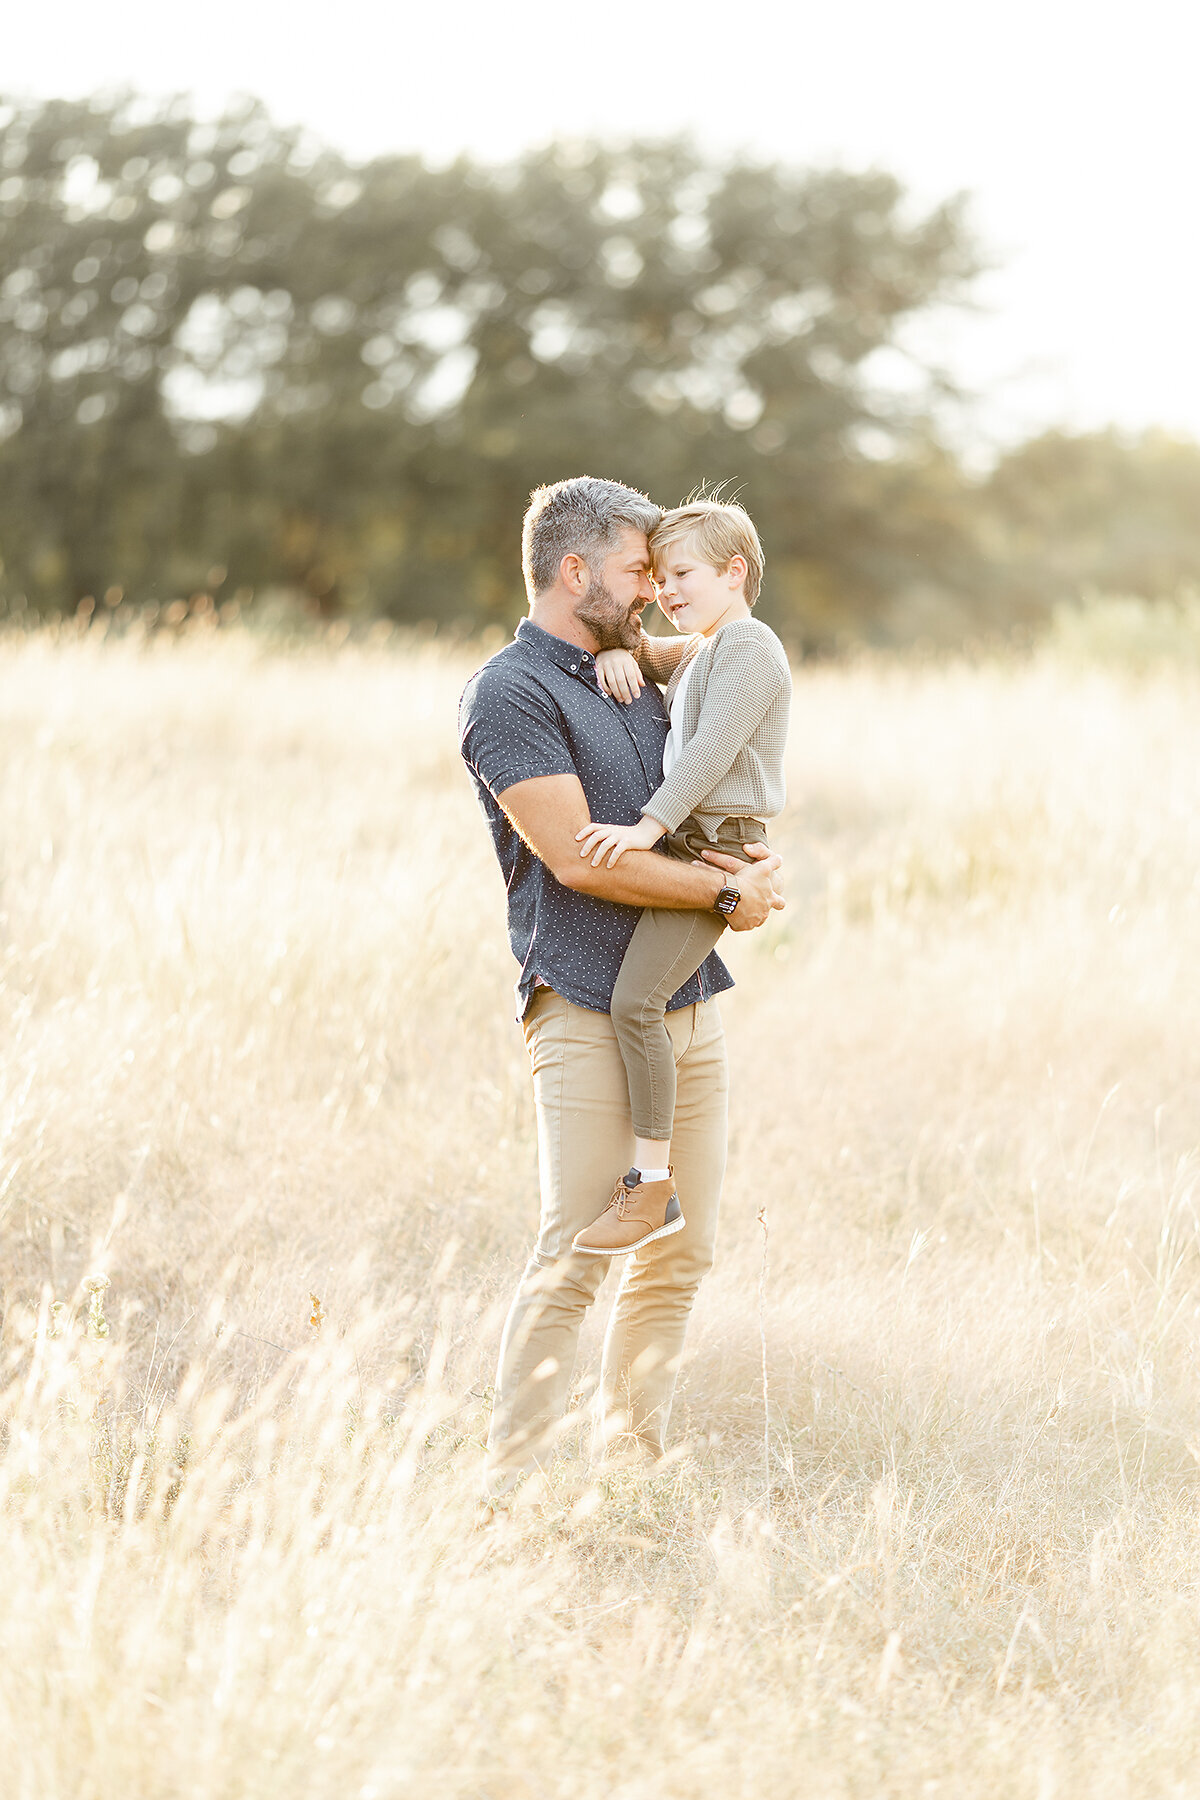 Photo of a father holding his son in the middle of a grassy field at a DWF park.